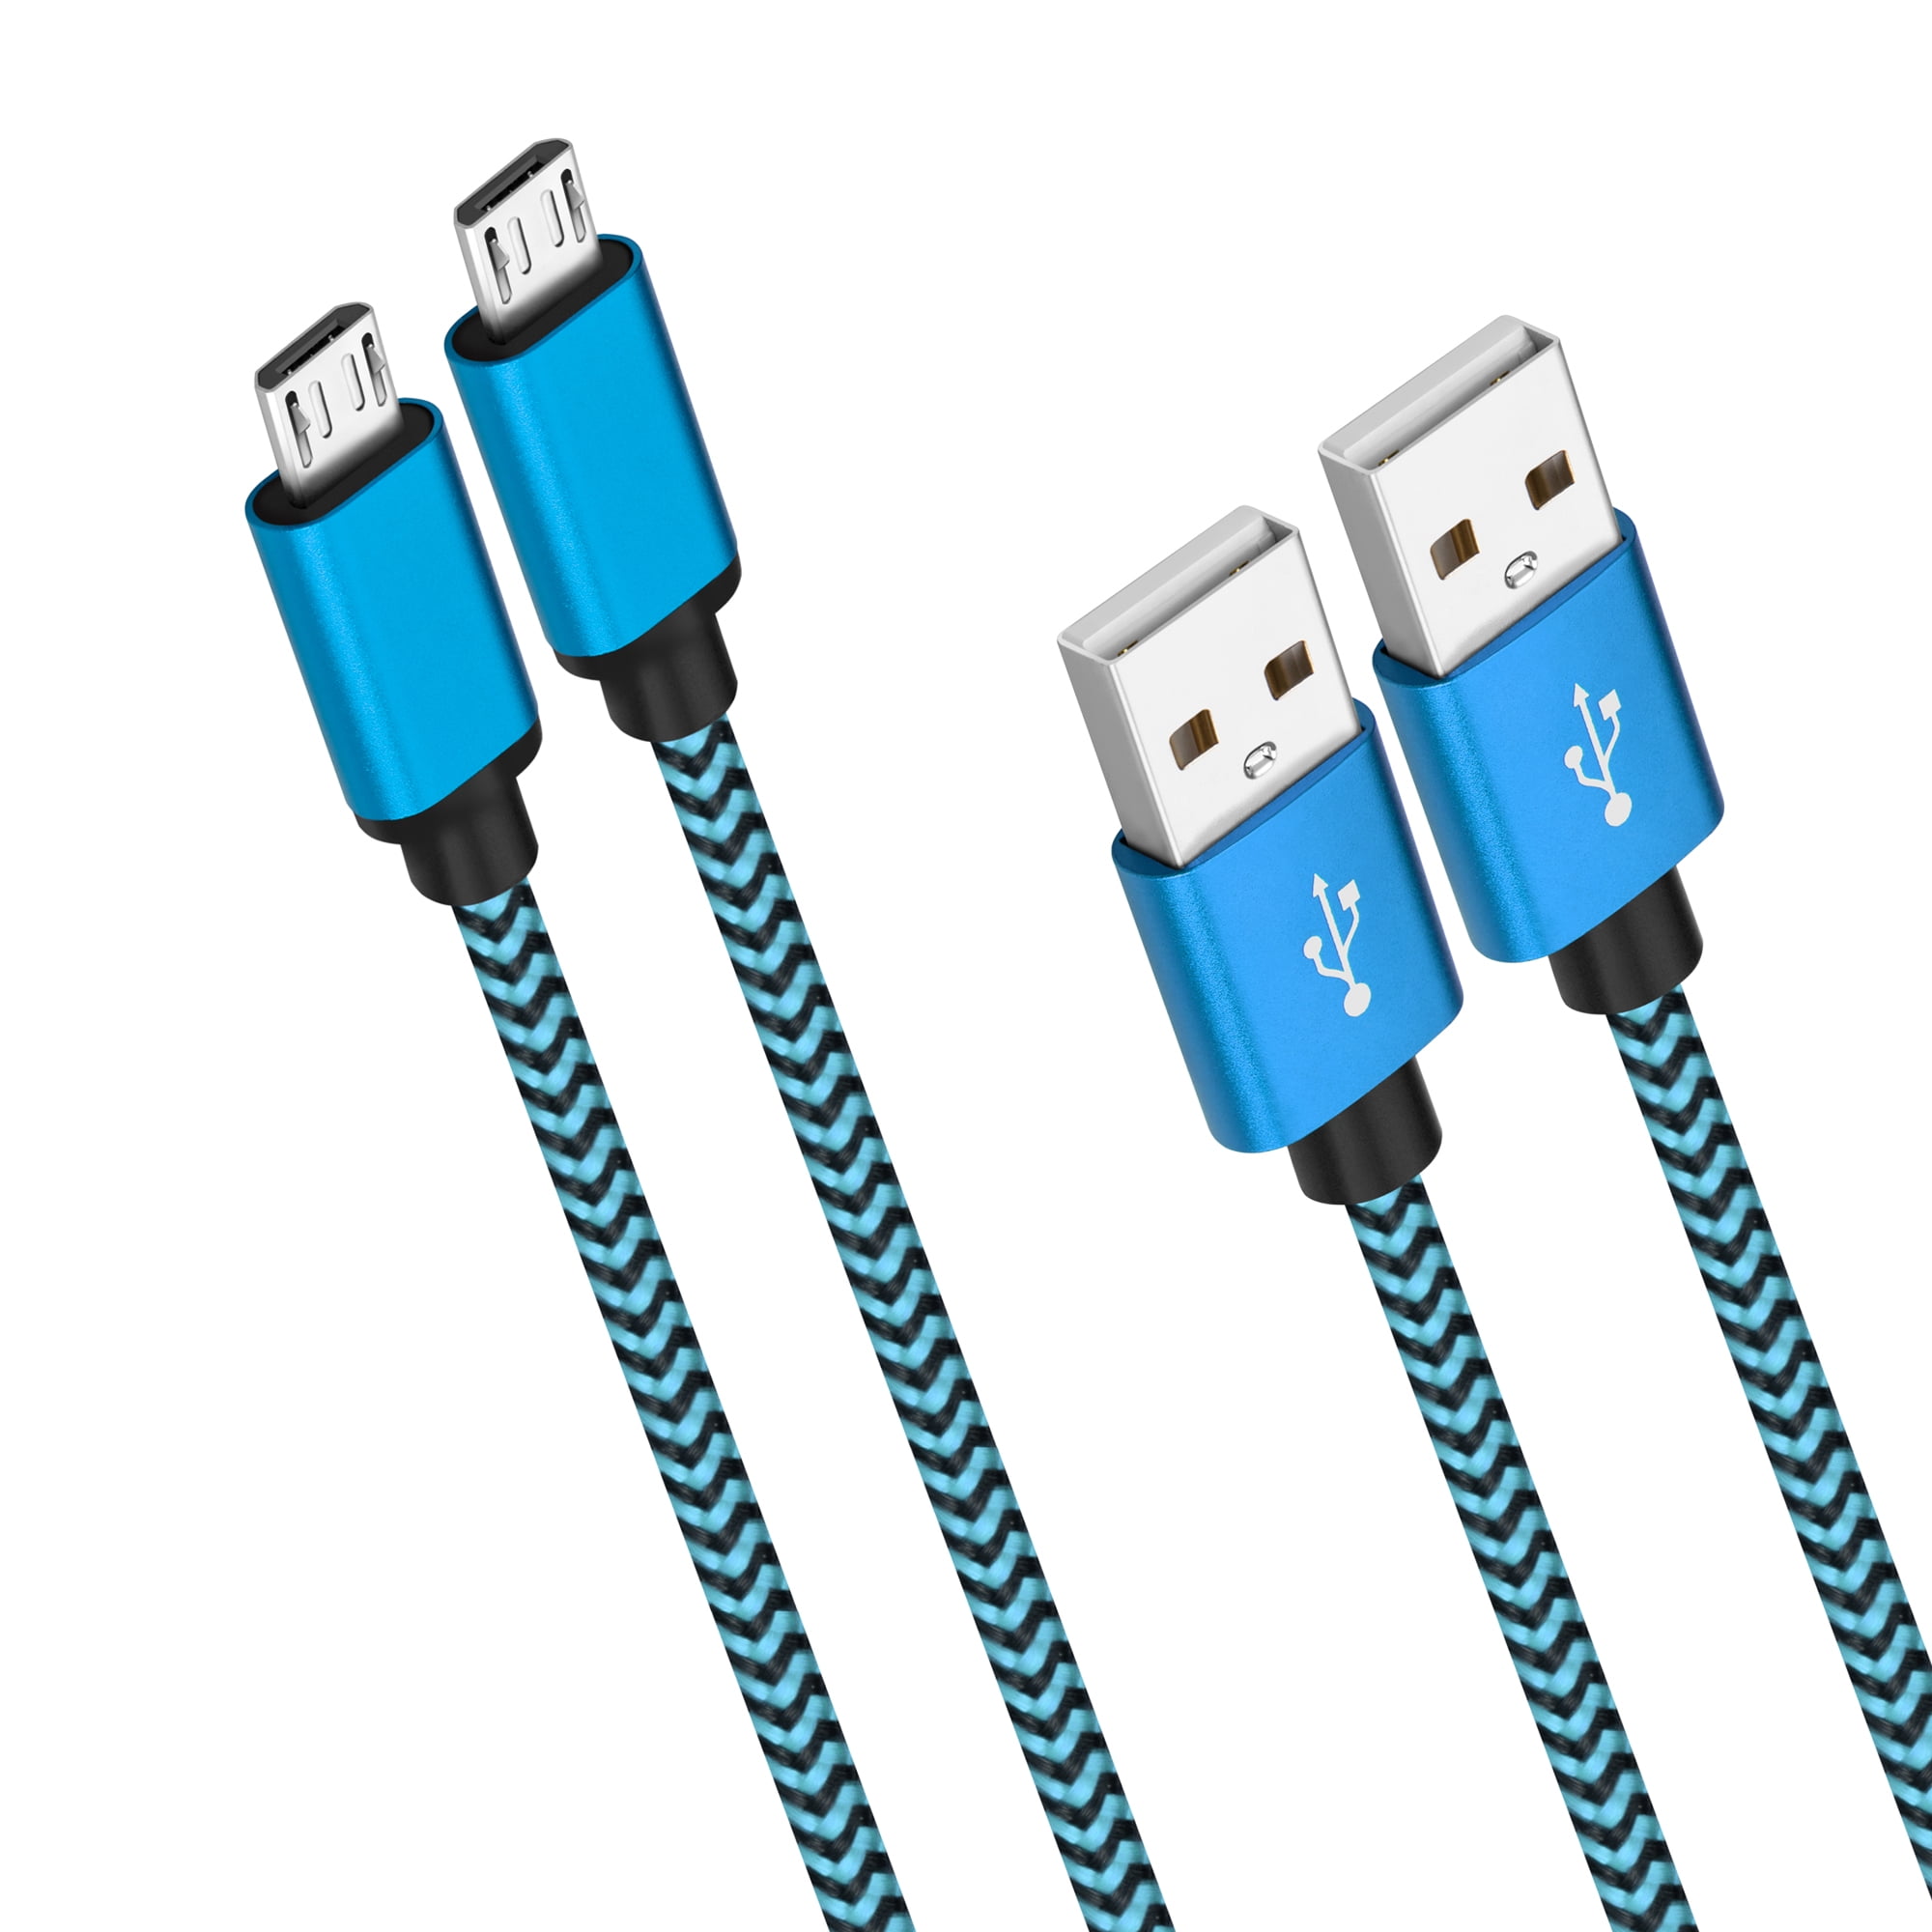 Baseus REVERSIBLE Micro USB Cable MicroUSB Cord android FAST